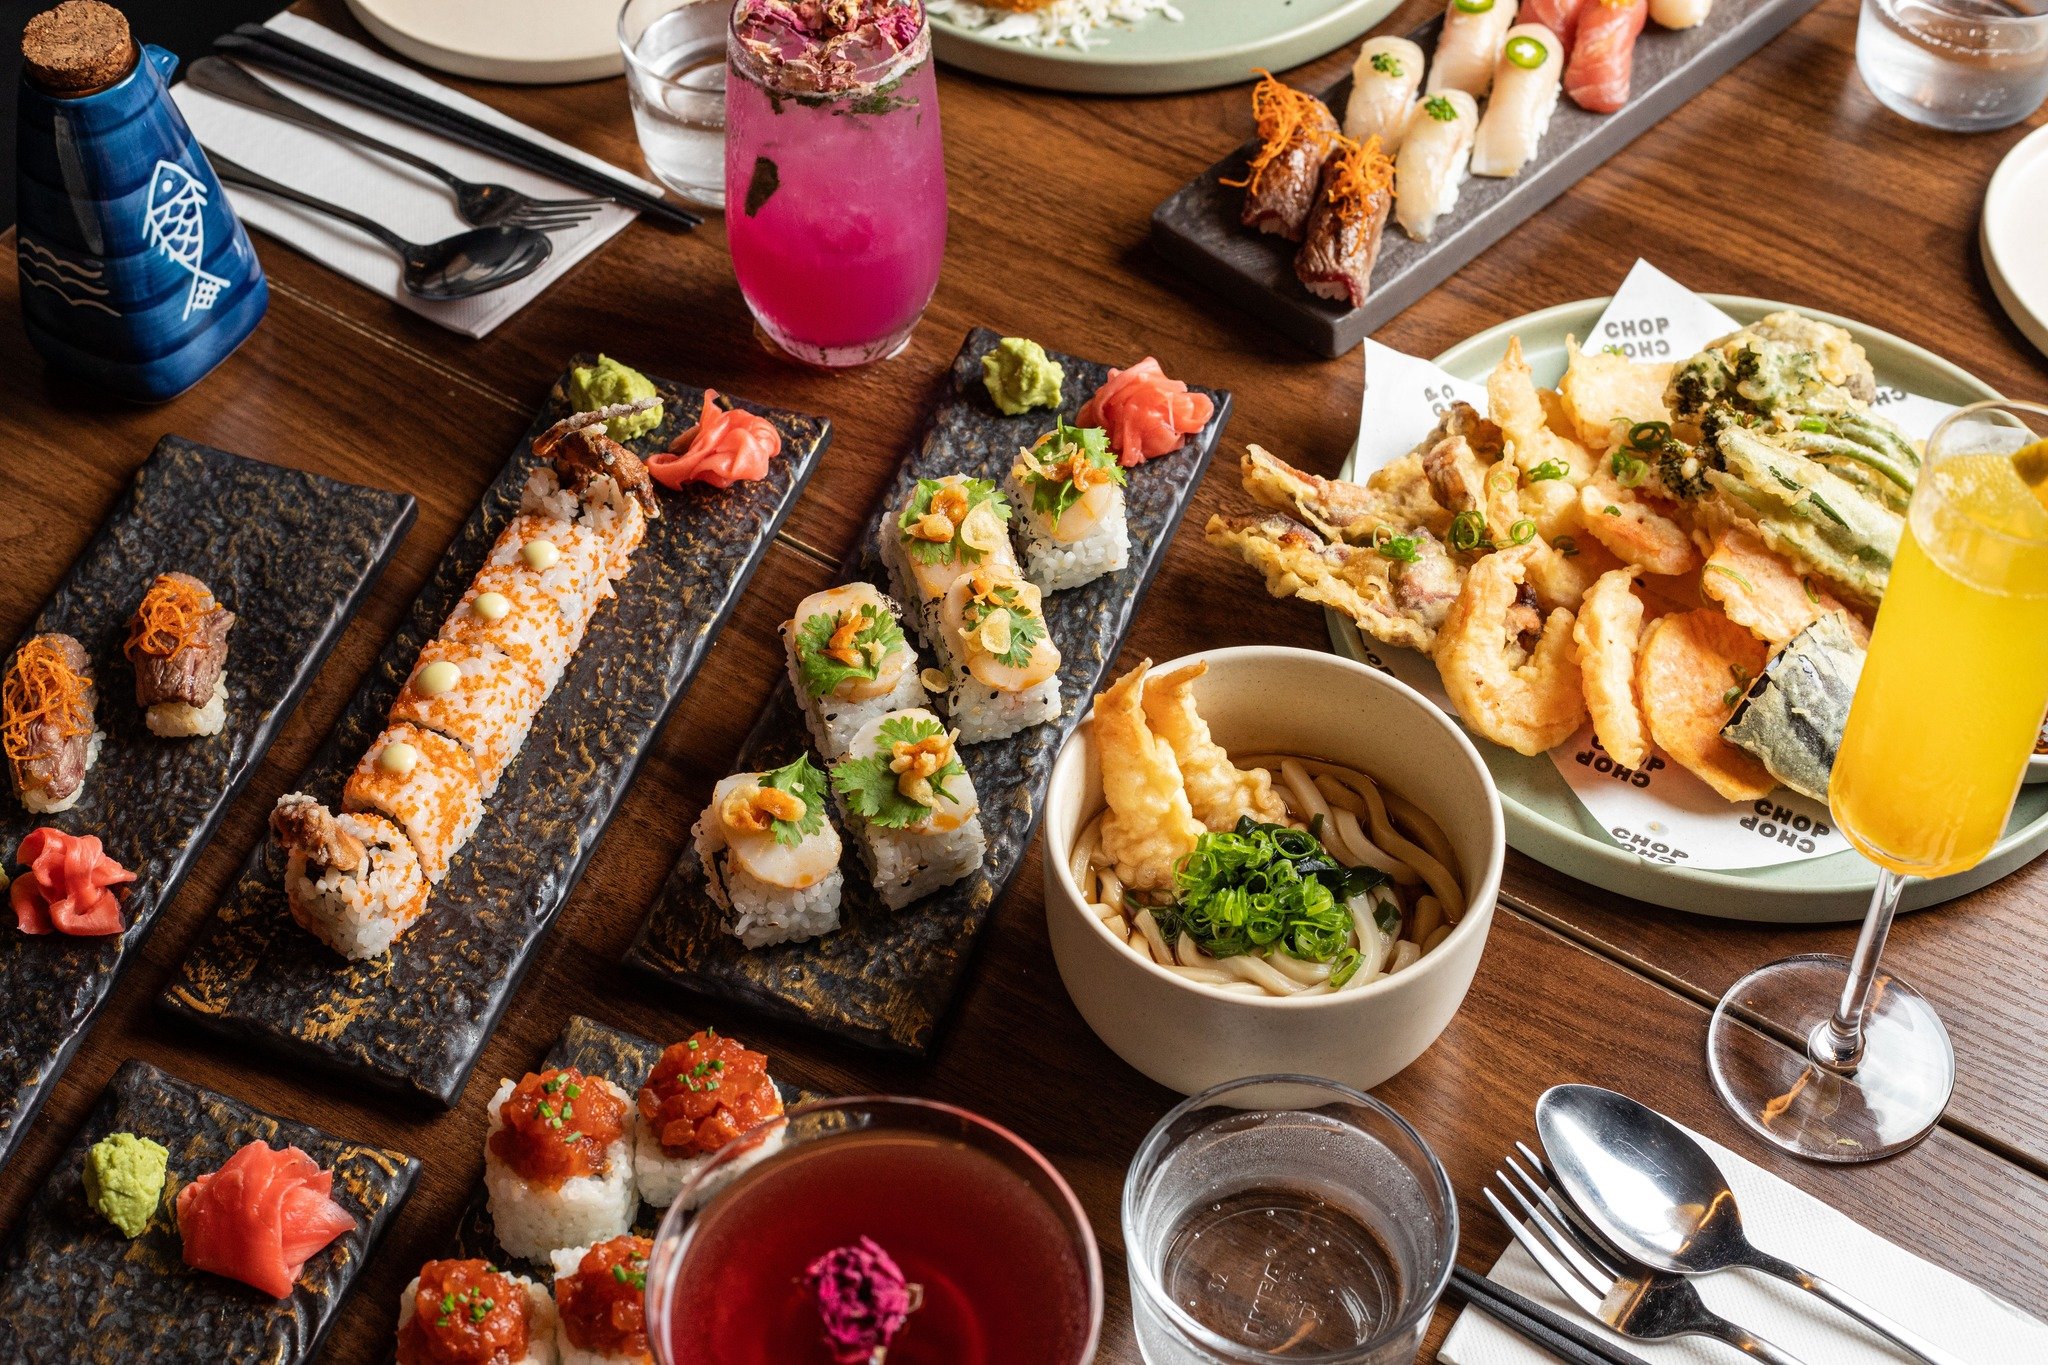 Searching for somewhere to go this weekend? Stop scrolling!

Immerse yourself in the harmony of traditional Japanese ingredients infused with contemporary twists with us.

Book now through the link in our bio.

#ChopChop #Canberra #Restaurant